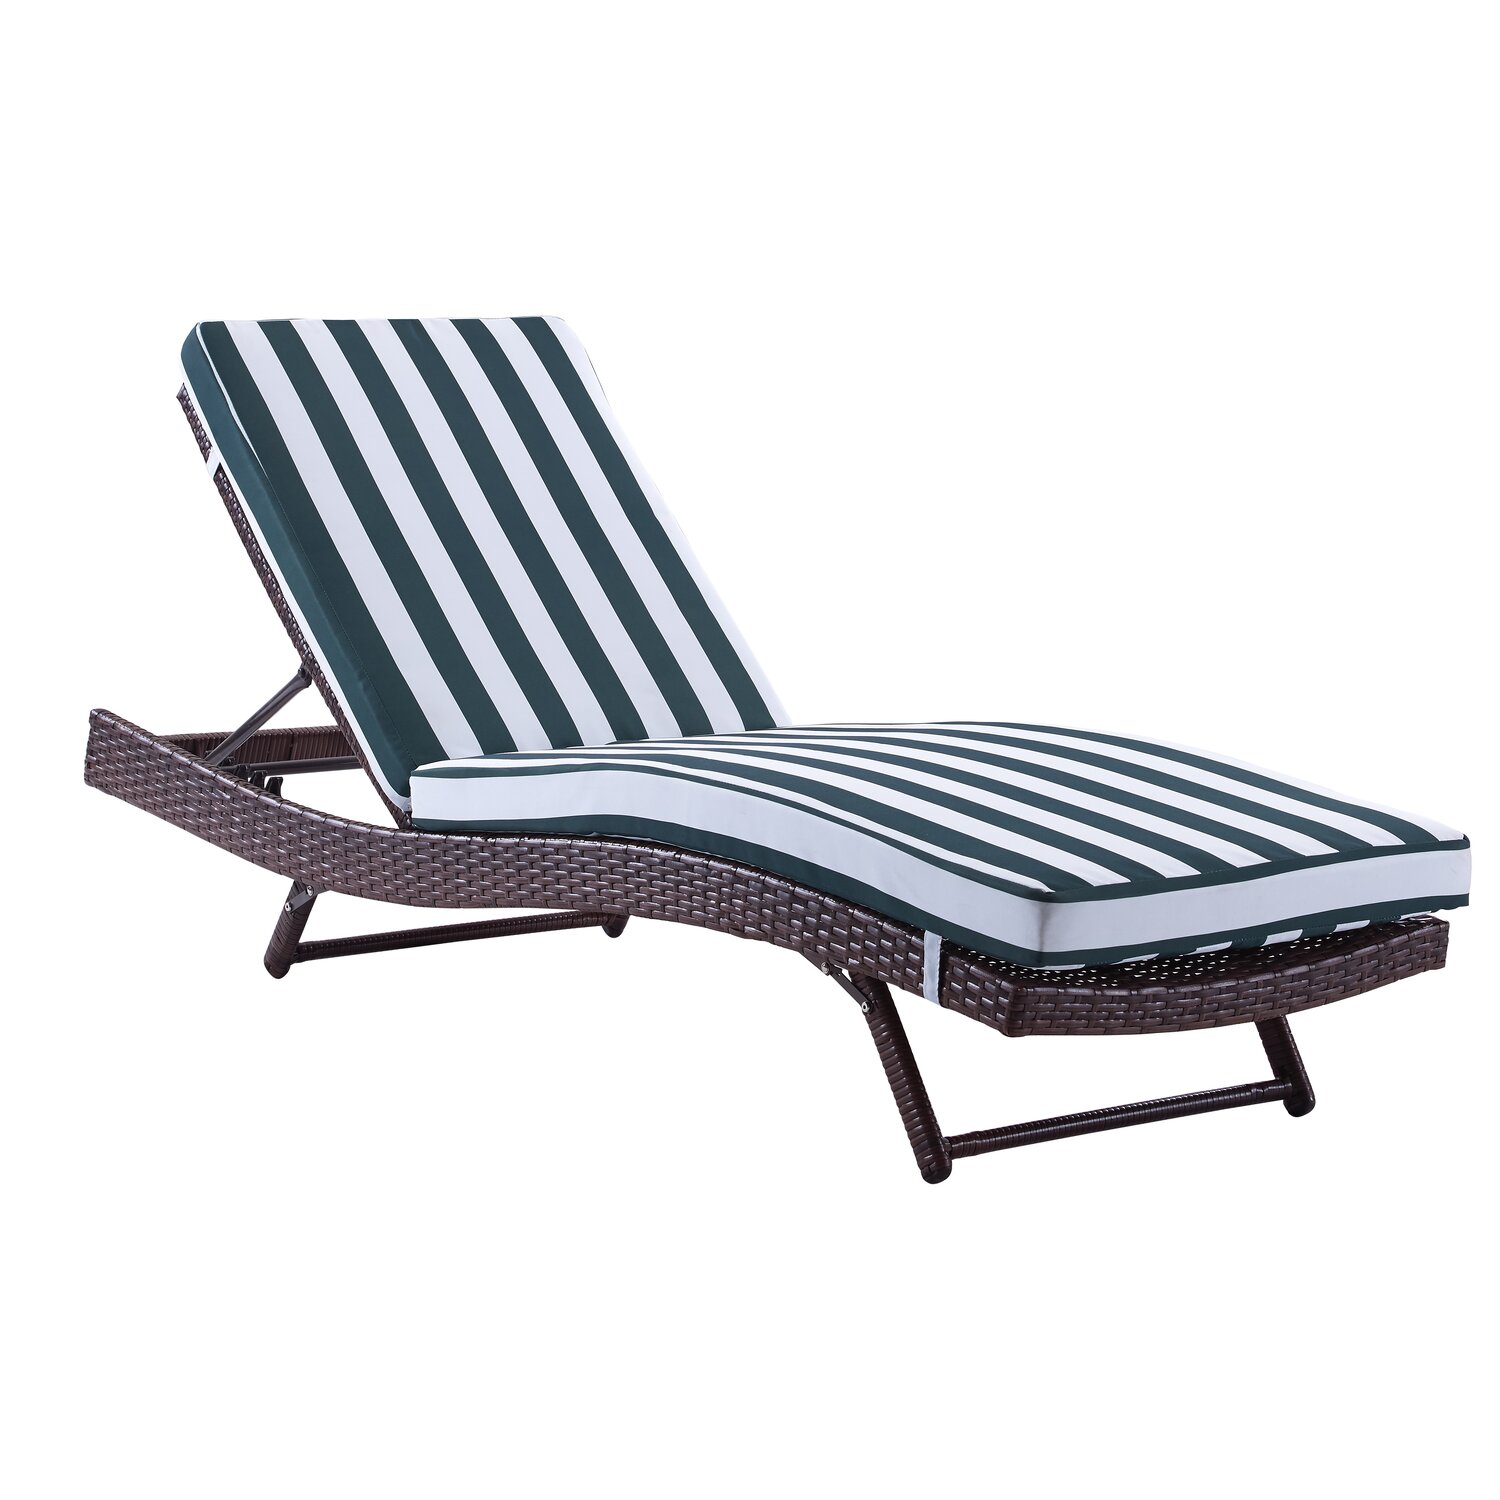 Patio Lounge Chairs Clearance: Home Kitchen